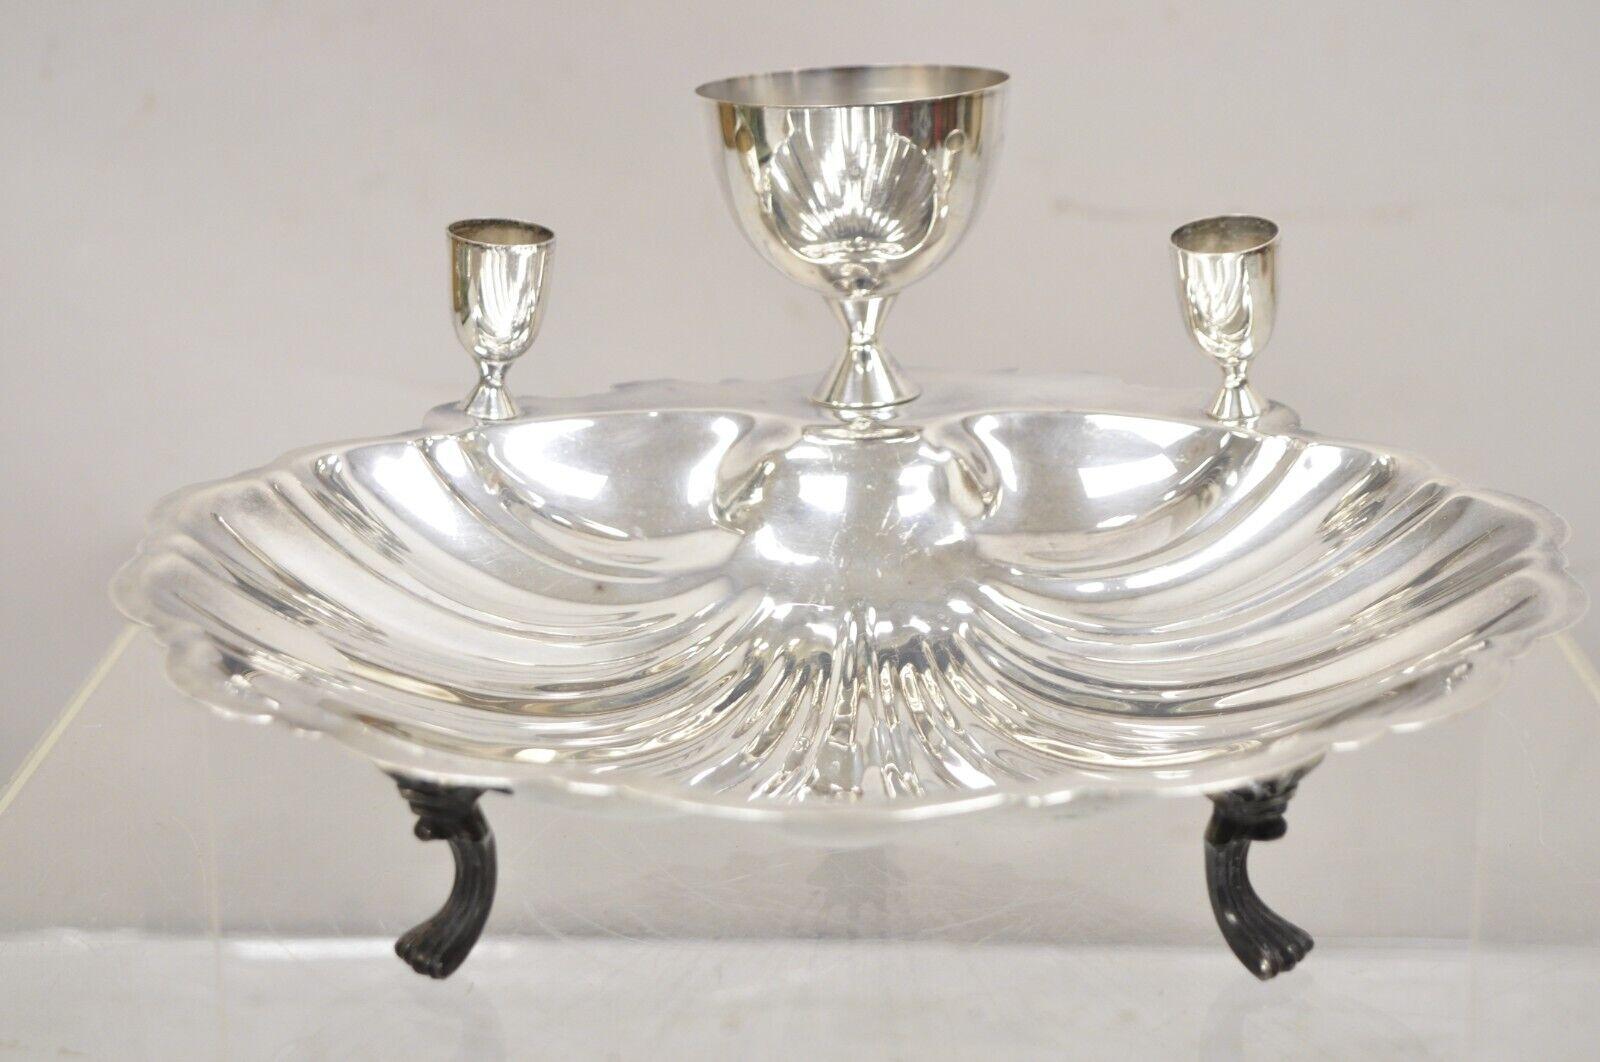 Regency Vintage FB Rogers Silver Plated Clam Shell Seafood Bowl Platter Server For Sale